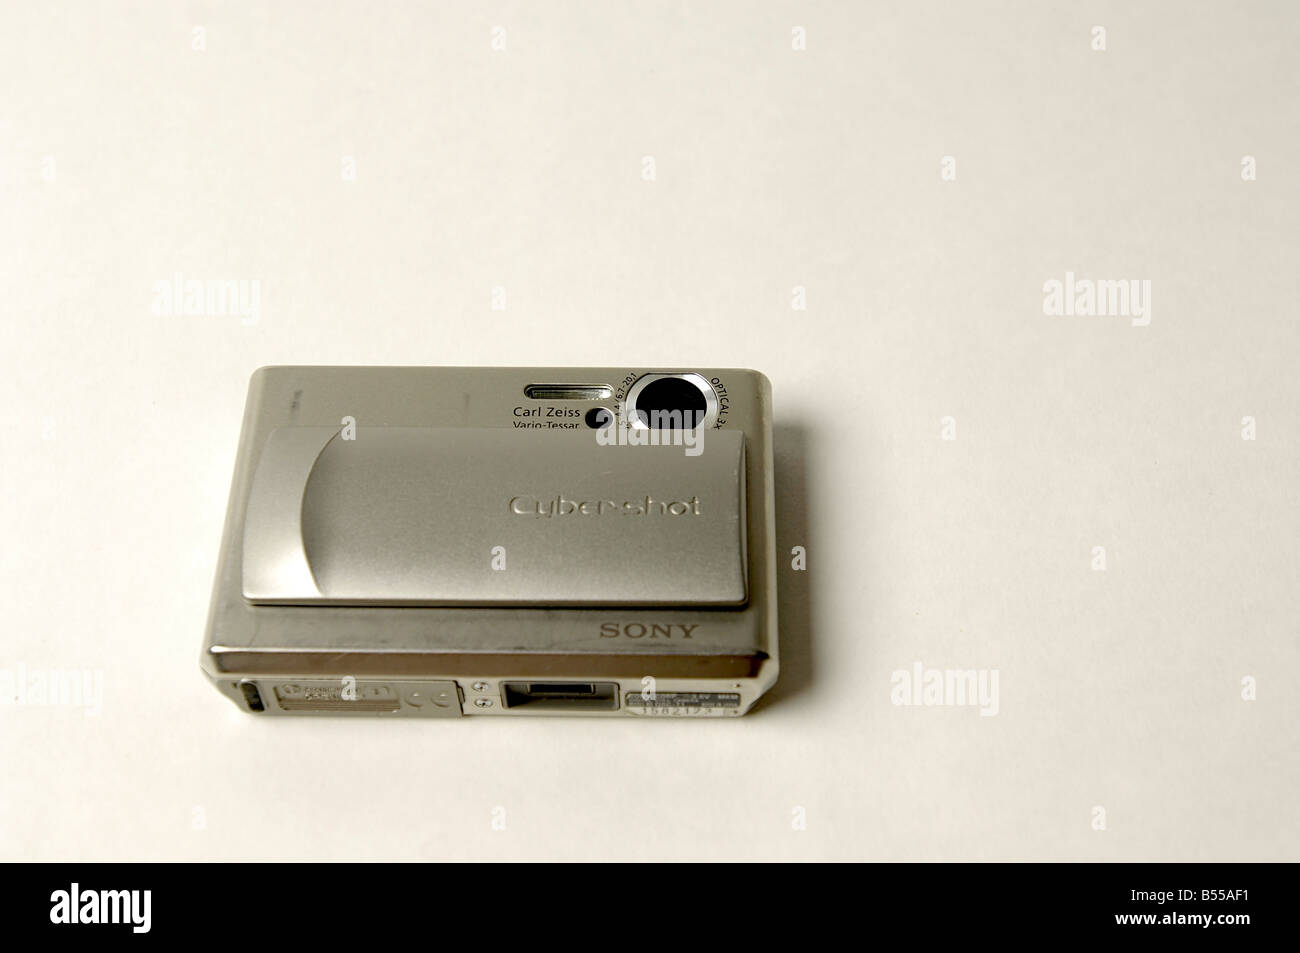 A well used cut out photo of a Sony 'DSC-T1' point and shoot consumer digital camera with Carl Zeiss lens Stock Photo